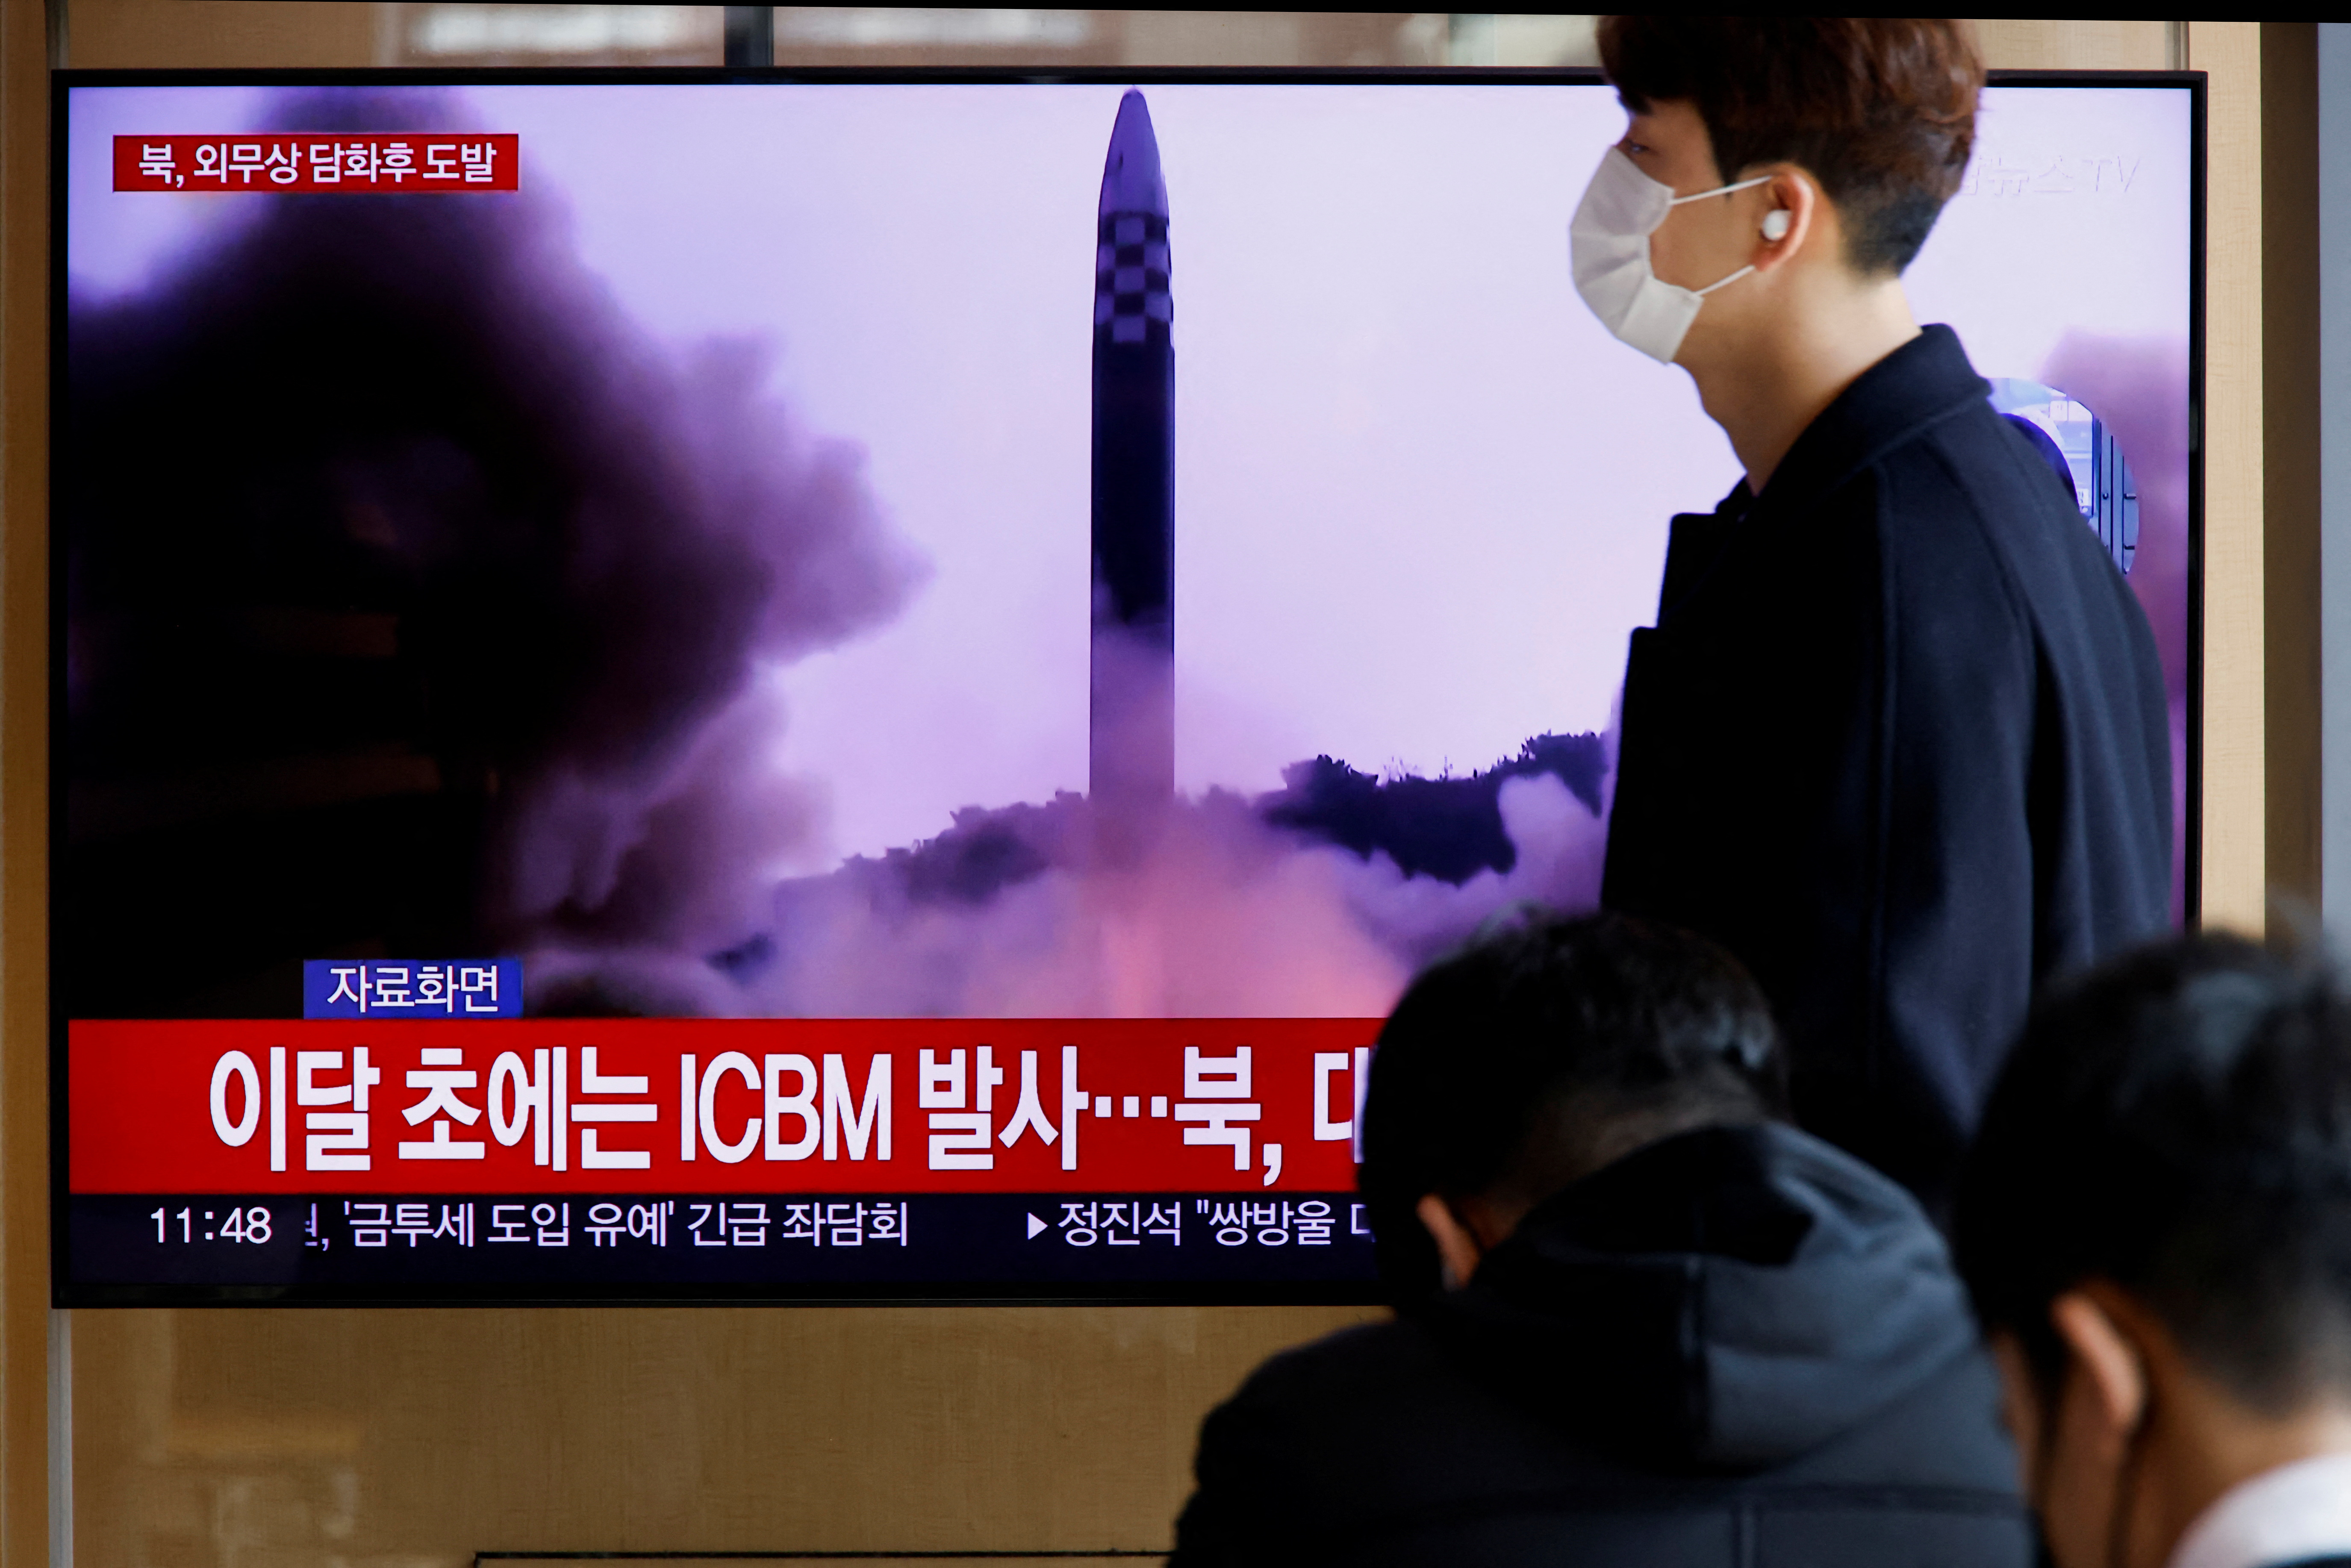 A man walks past a TV broadcasting a news report, on North Korea firing a ballistic missile off its east coast, in Seoul